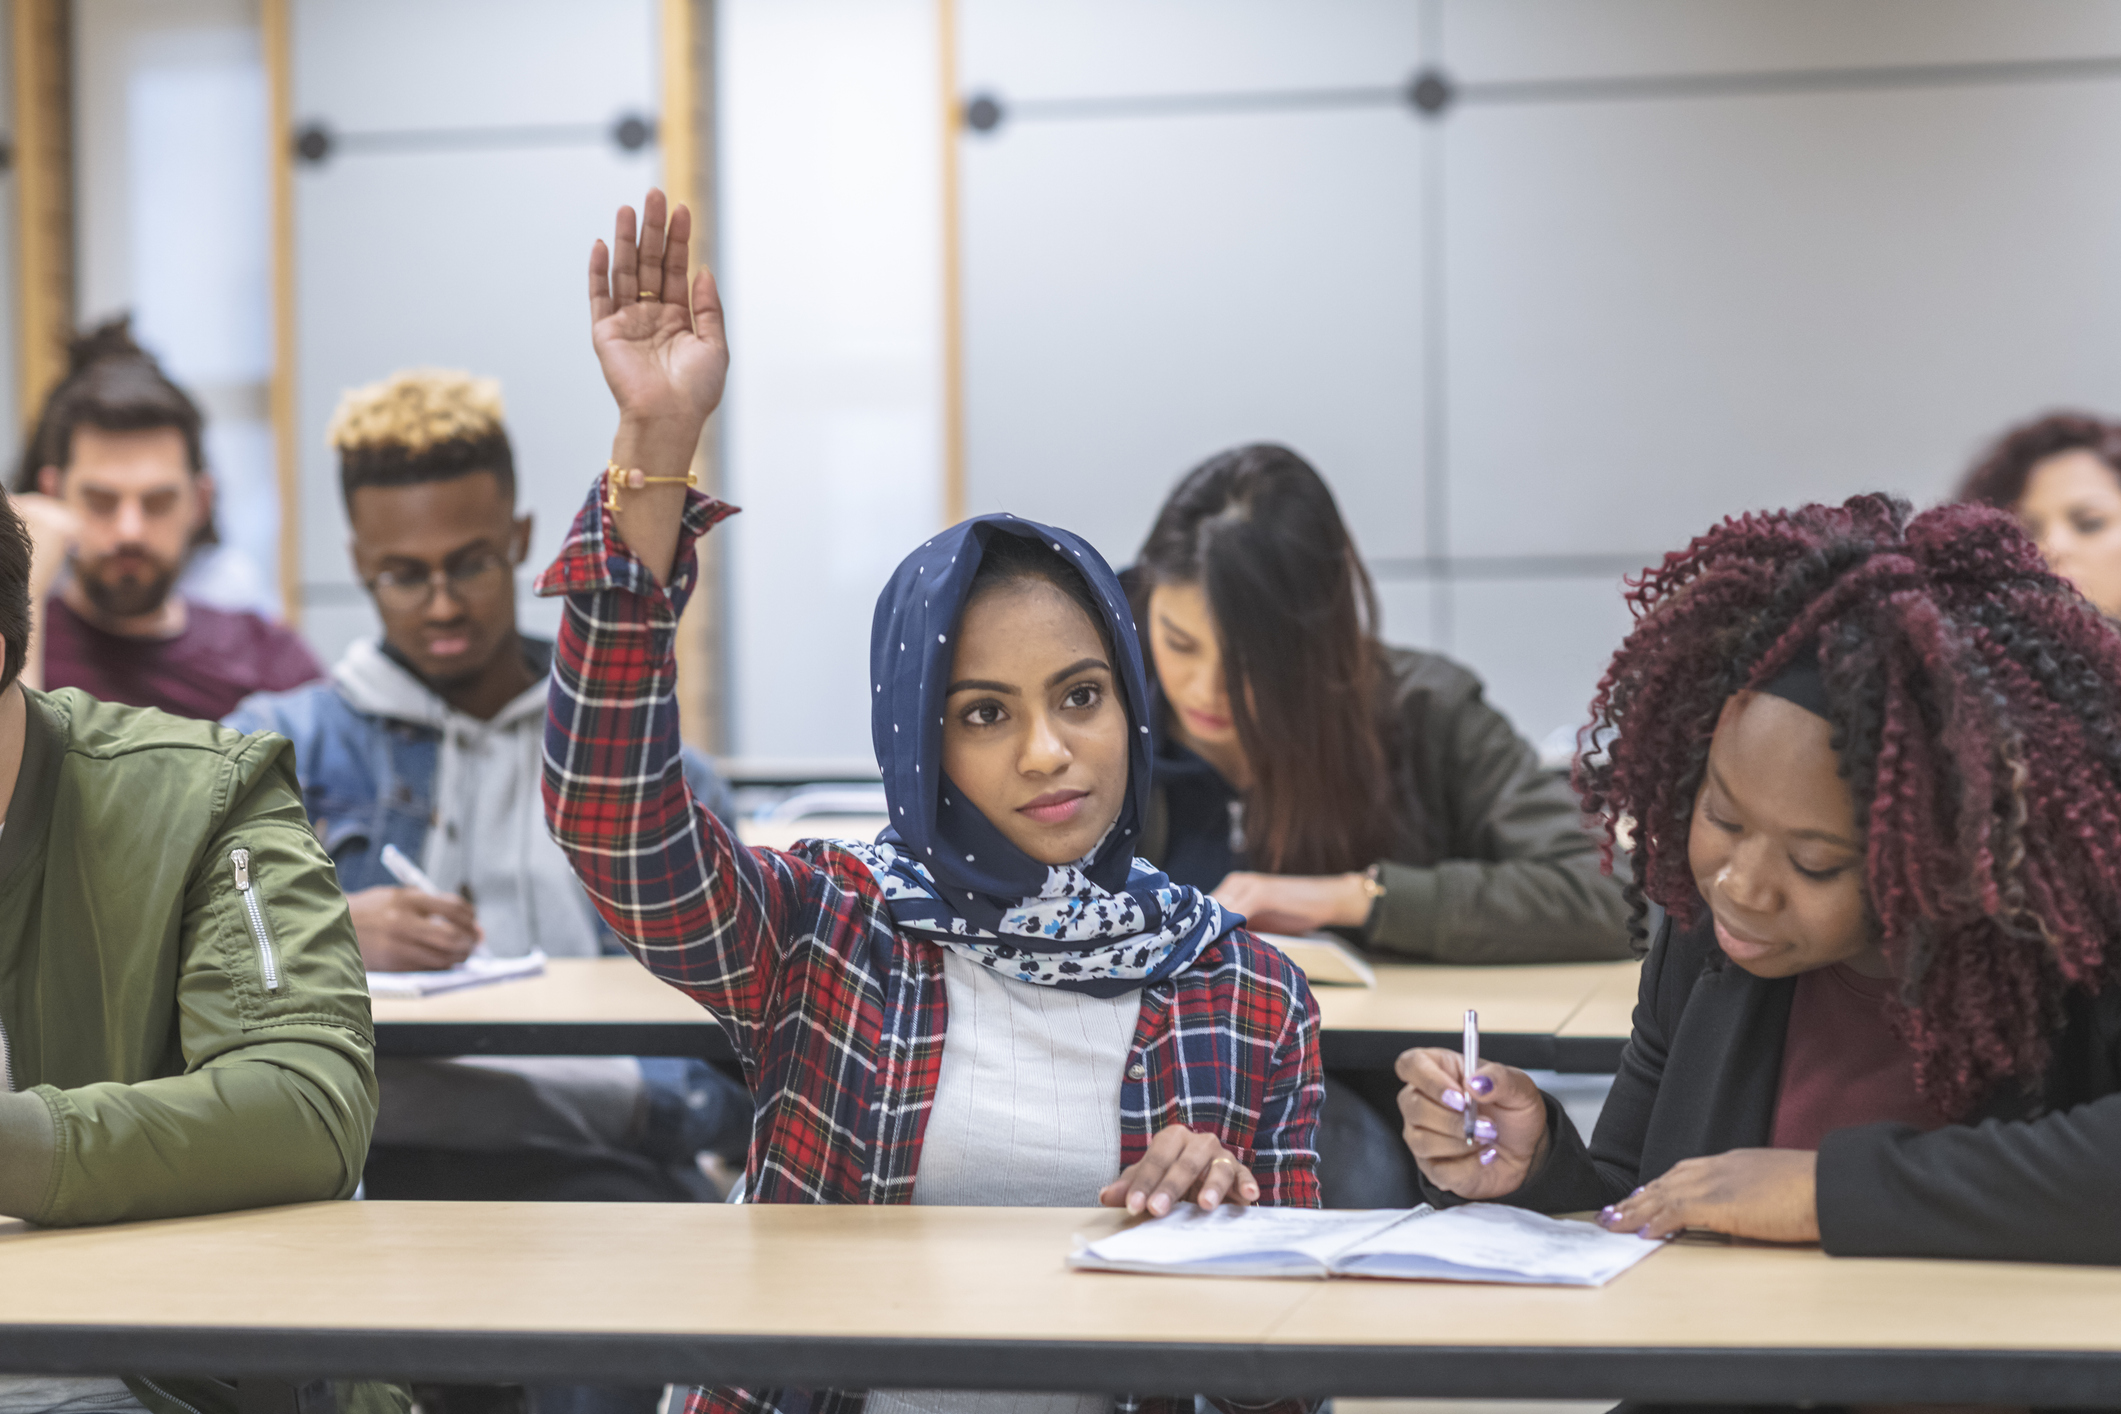 A female international student raising her hand in class, surrounded by other students